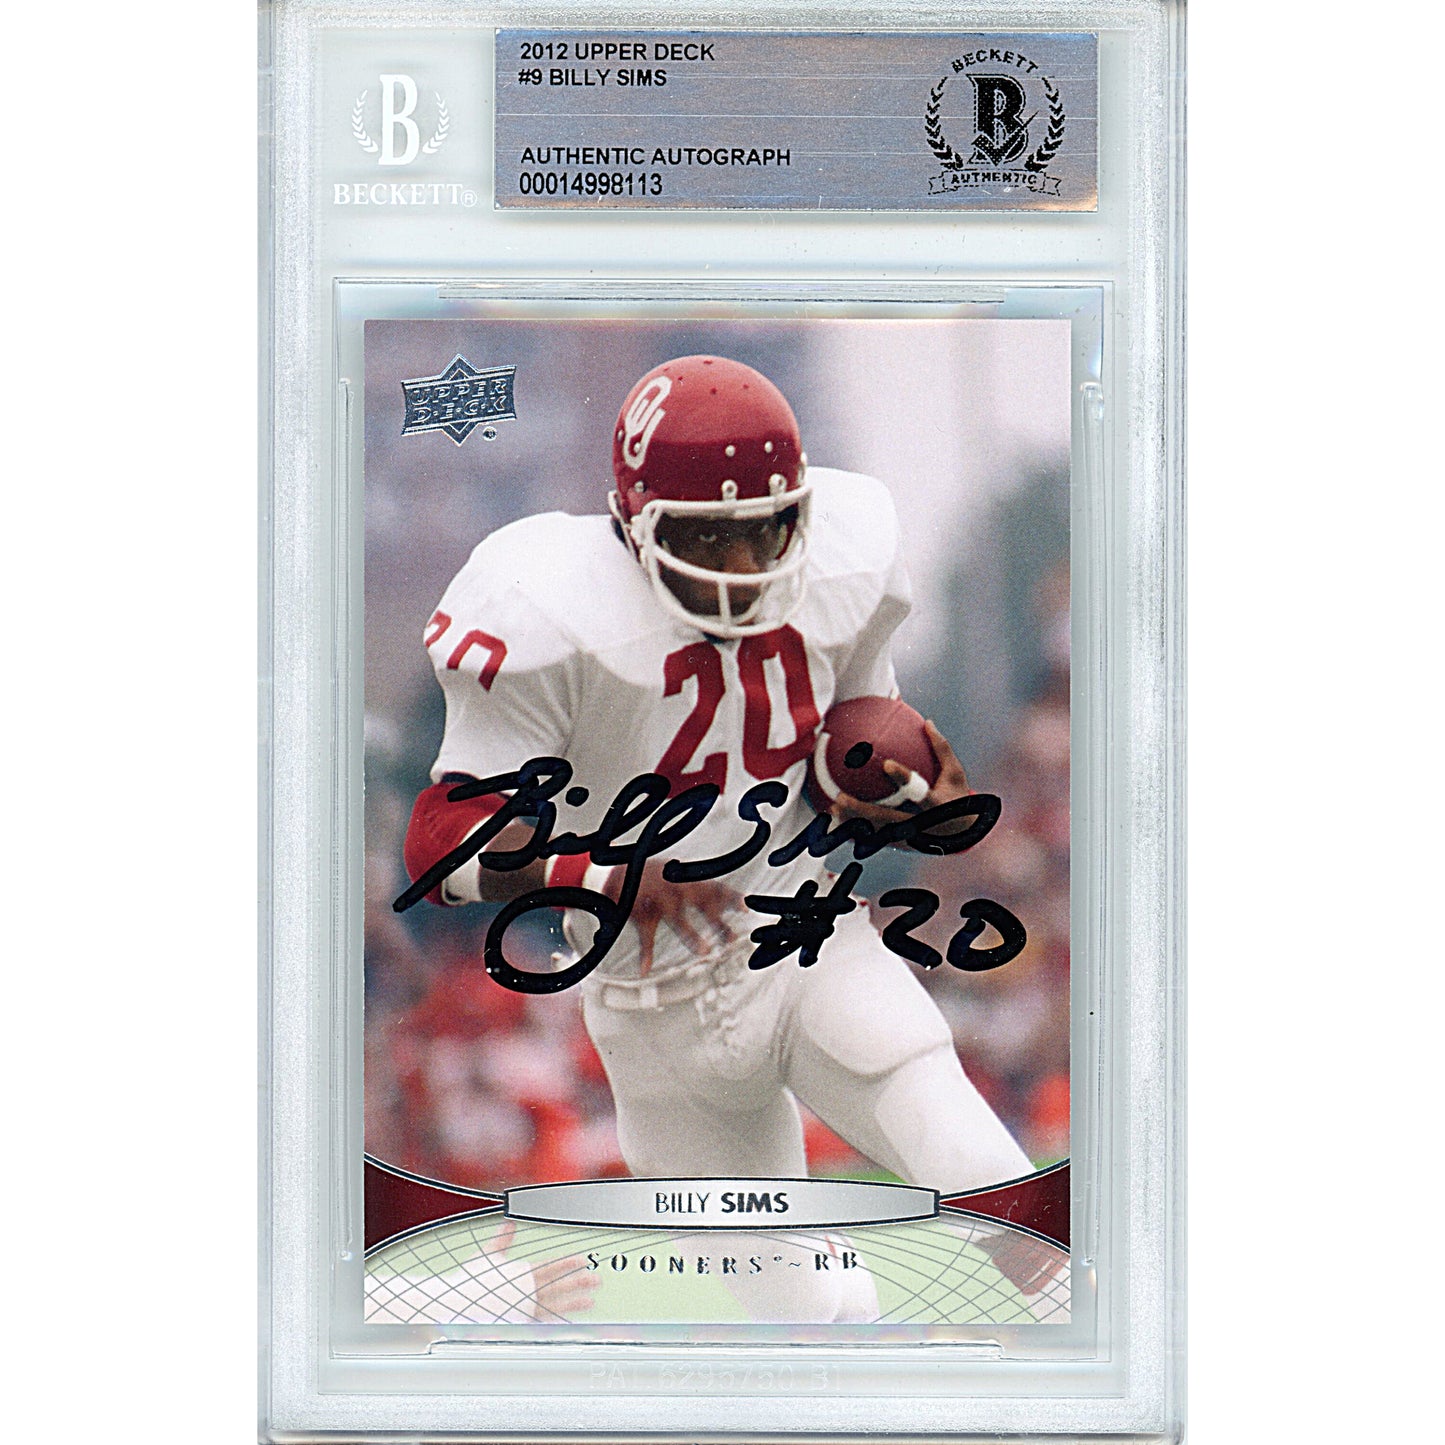 Football- Autographed- Billy Sims Signed Oklahoma Sooners 2012 Upper Deck Football Card Beckett Authentication Slabbed 00014998113 - 101